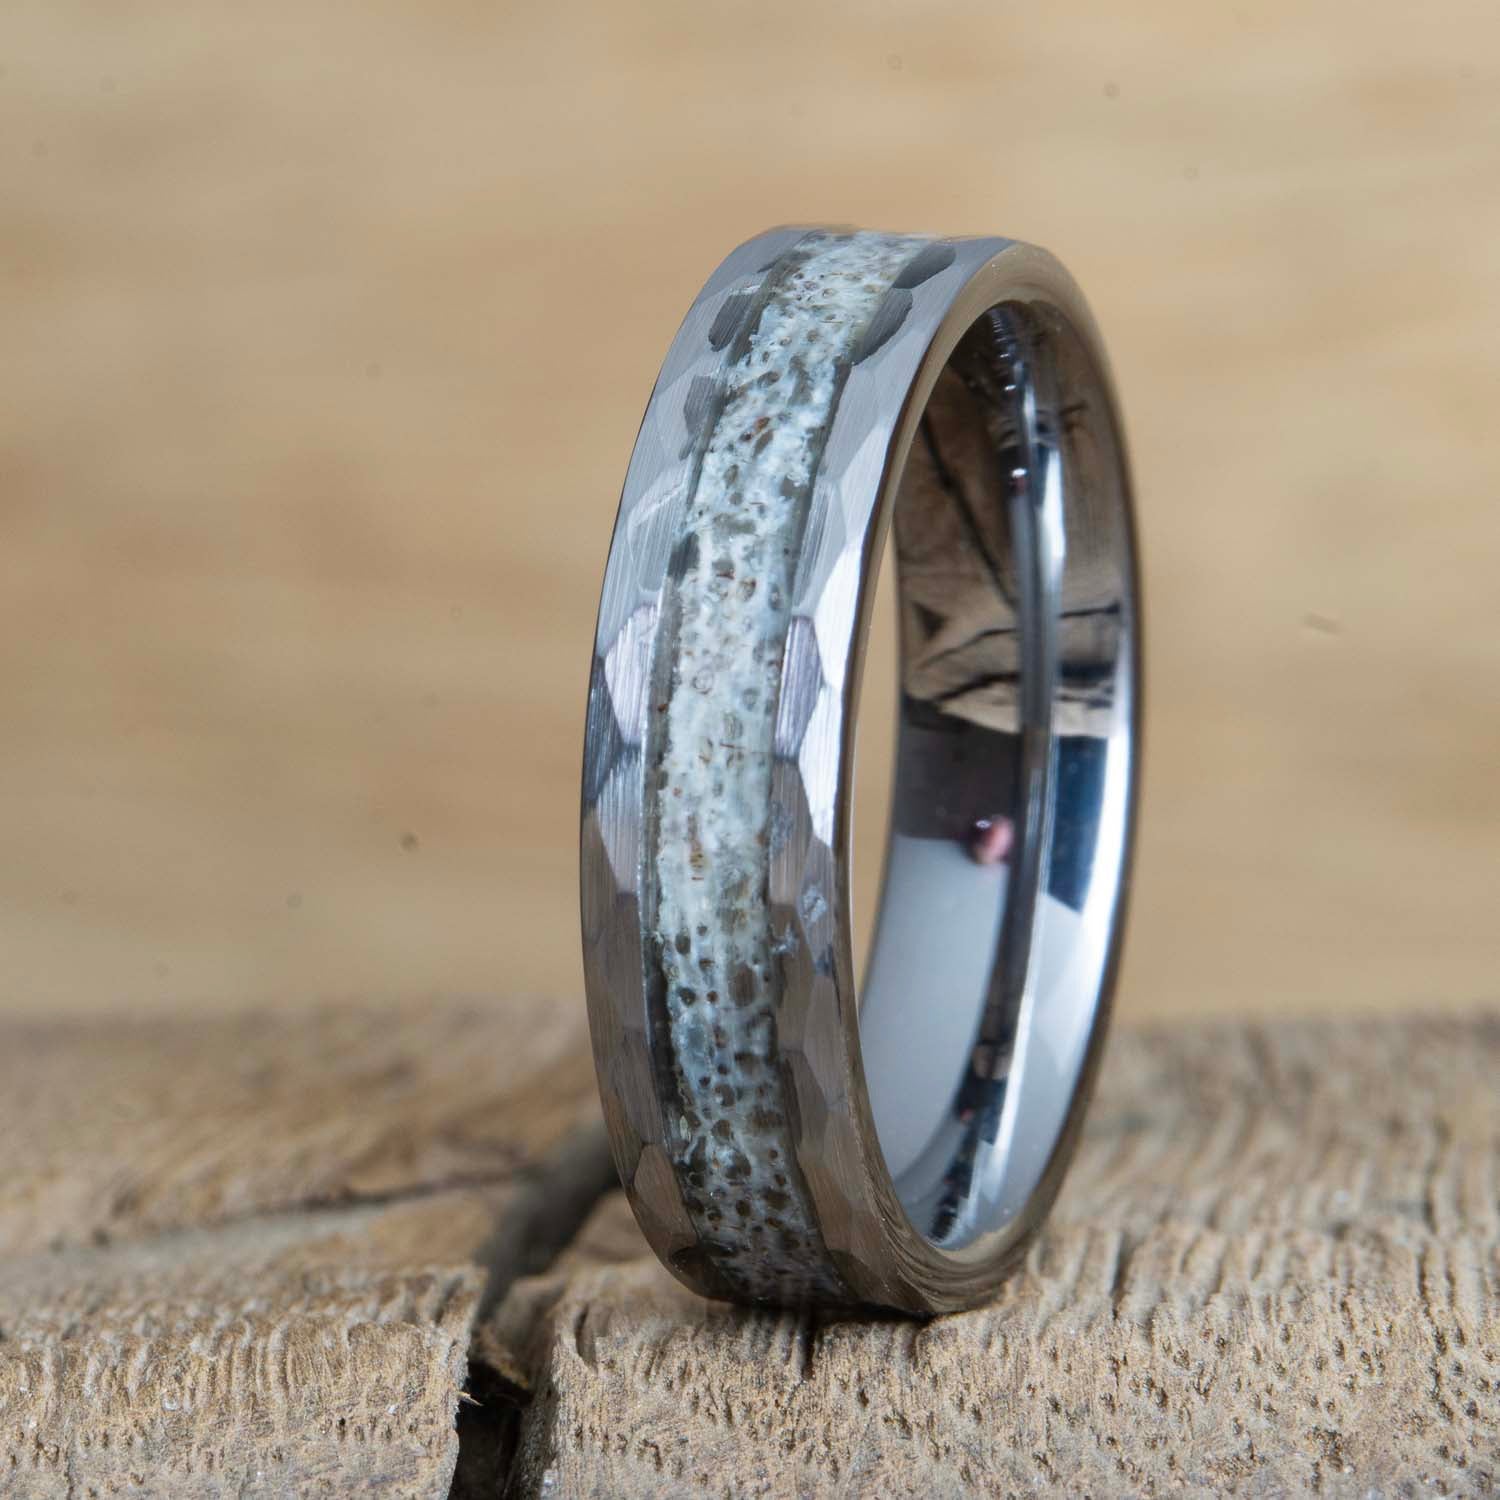 The hammered stag- Tungsten ring with hammered finish and antler 6mm